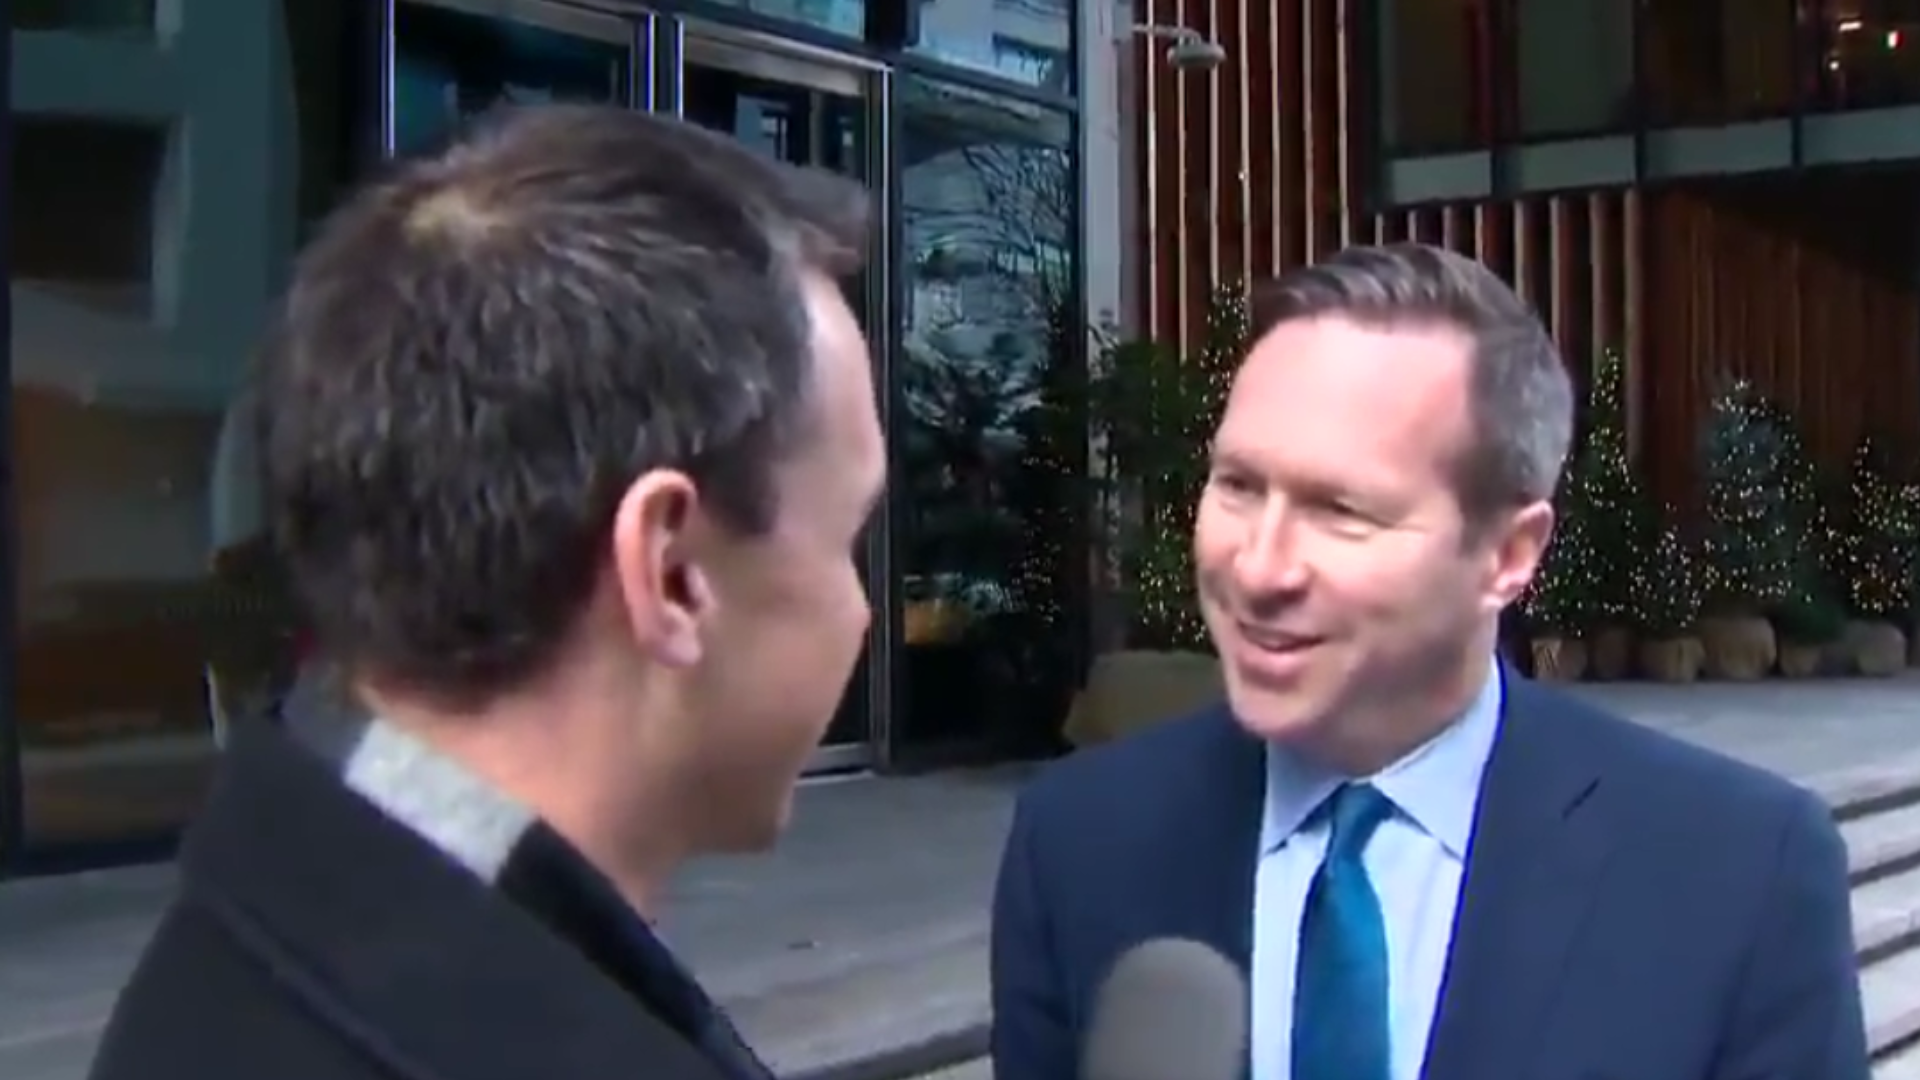 "Today was a good day," Carolina Panthers President Tom Glick told WCNC NBC Charlotte Sports Director Nick Carboni outside the meeting in Brooklyn. "We're convinced